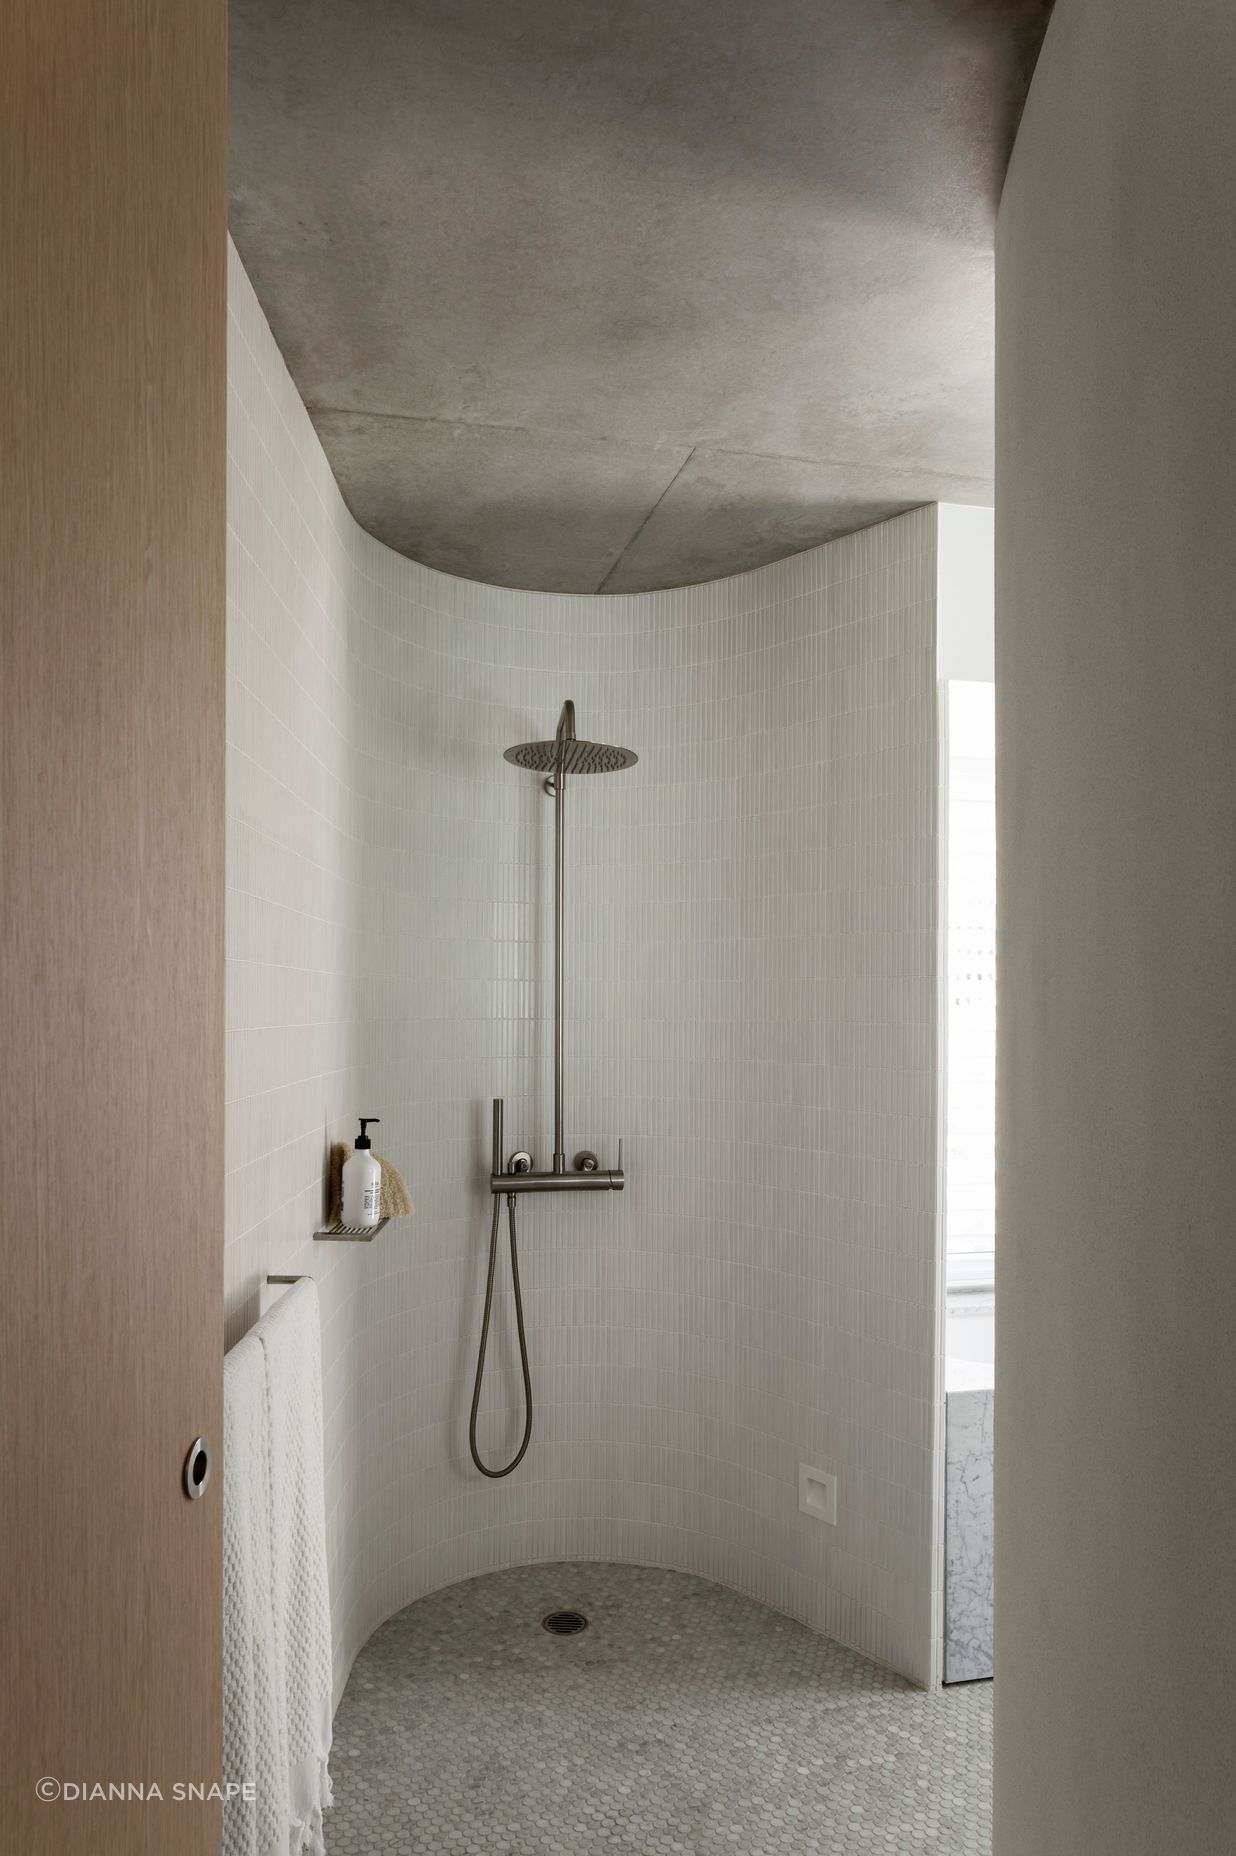 A curved shower room looks as if hewn out of stone.